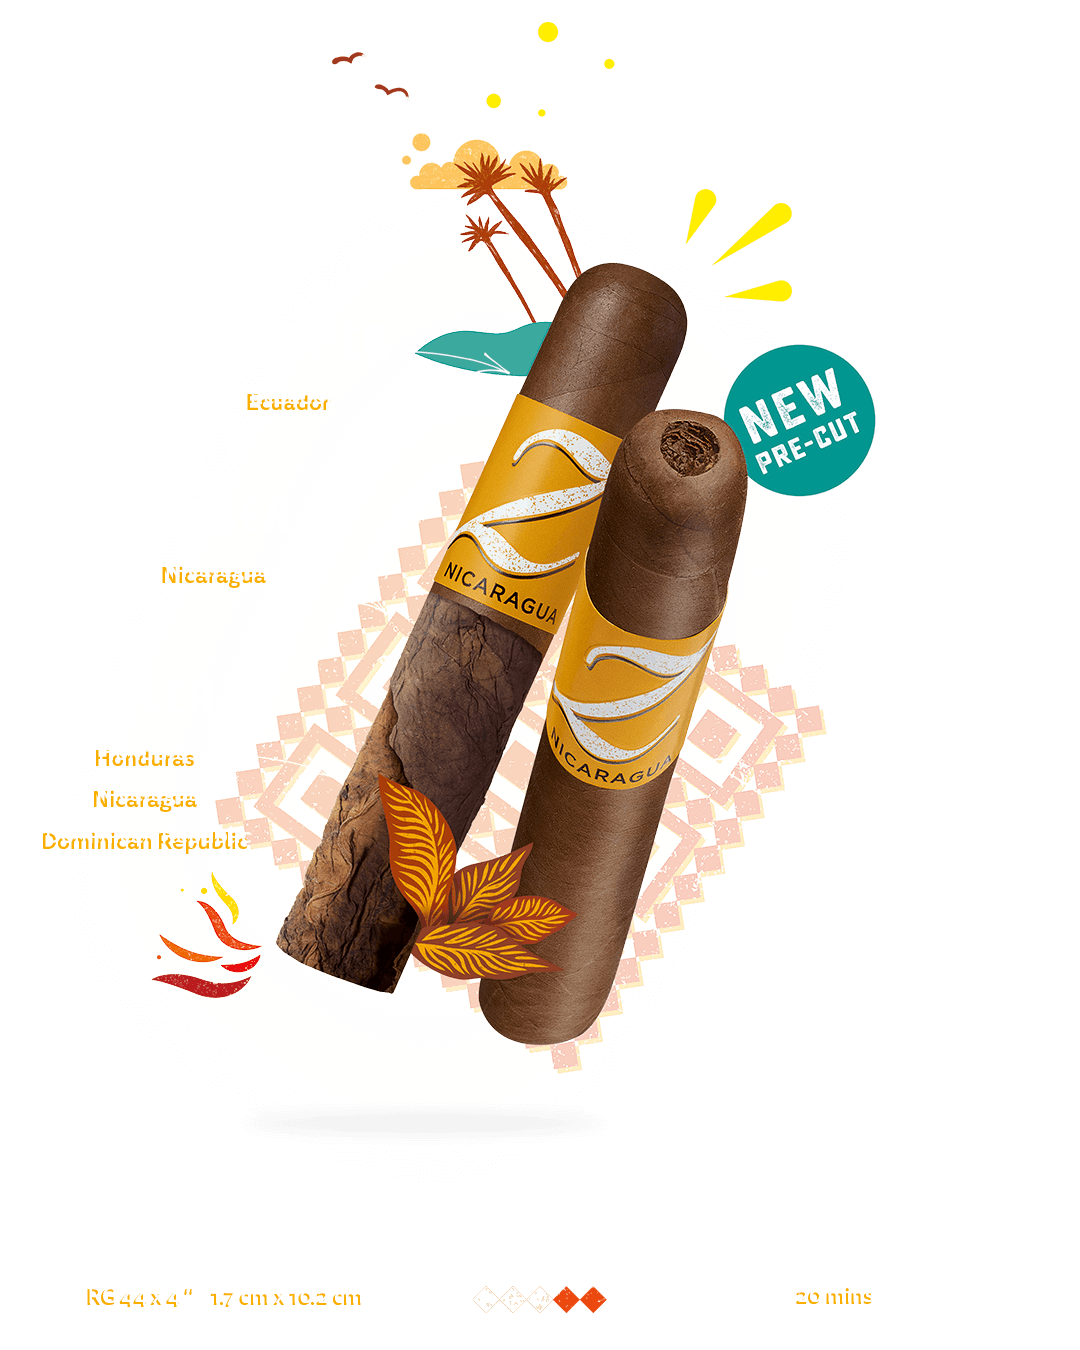 Taste banner of the pre-cut Zino Nicaragua Half Corona cigar with details about the tobacco blend, the main aromas, the enjoyment time and the intensity.